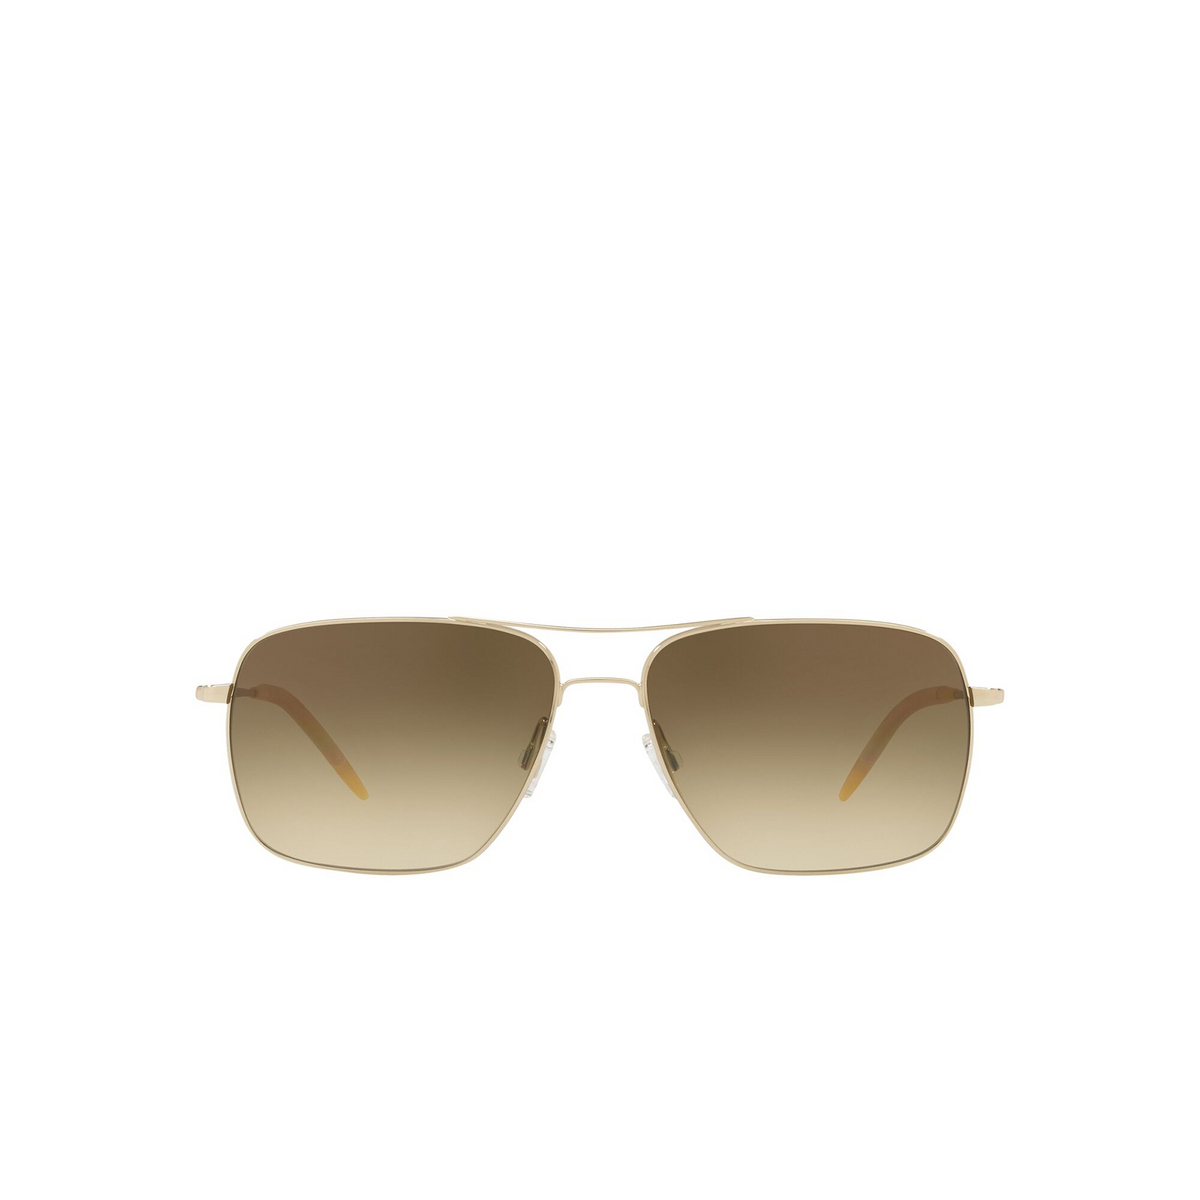 Oliver Peoples® Rectangle Sunglasses: Clifton OV1150S color Gold 503585 - front view.